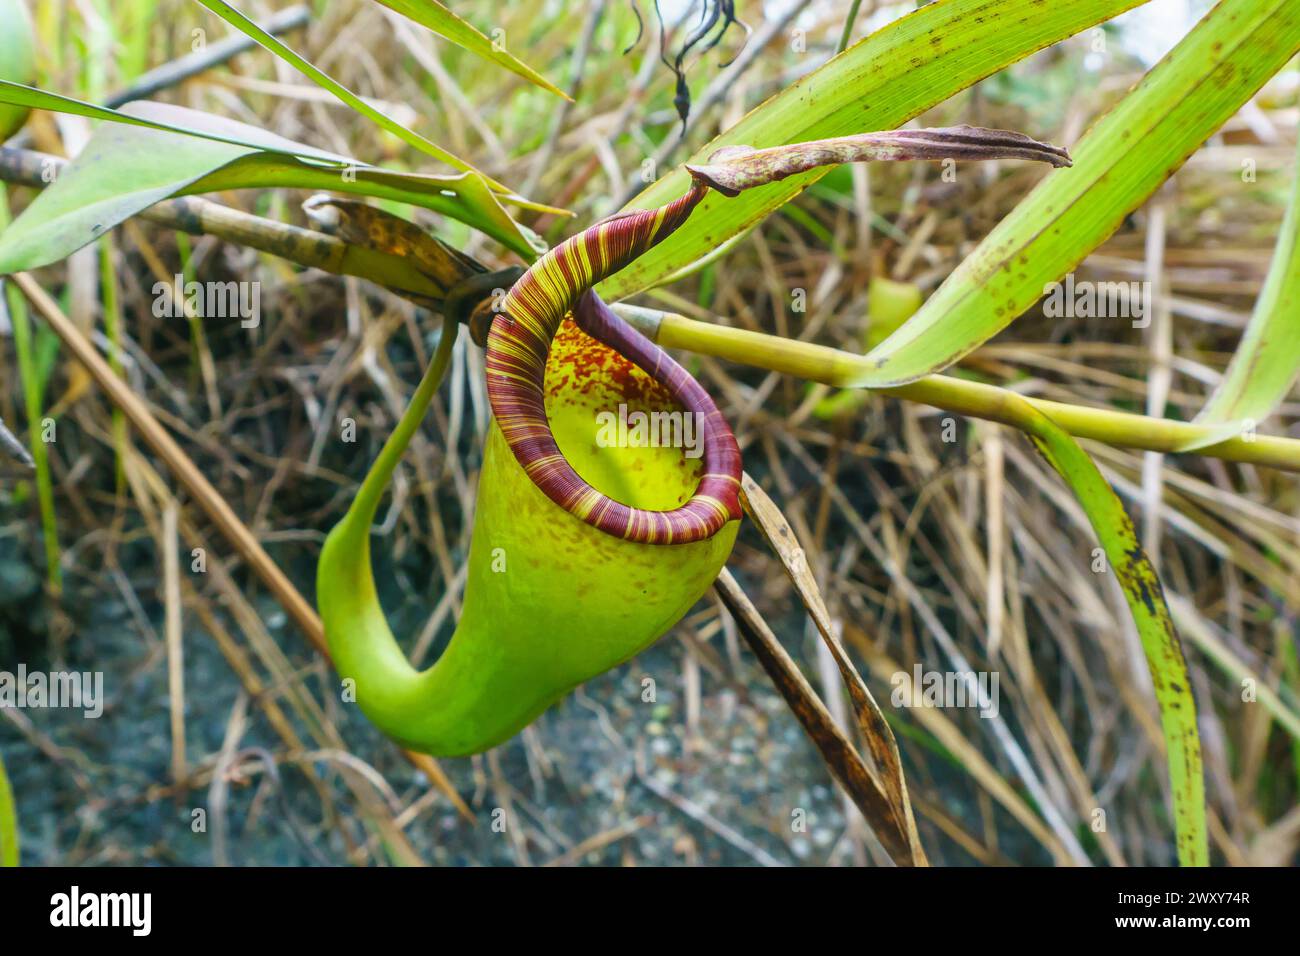 Nepenthes Foto Stock